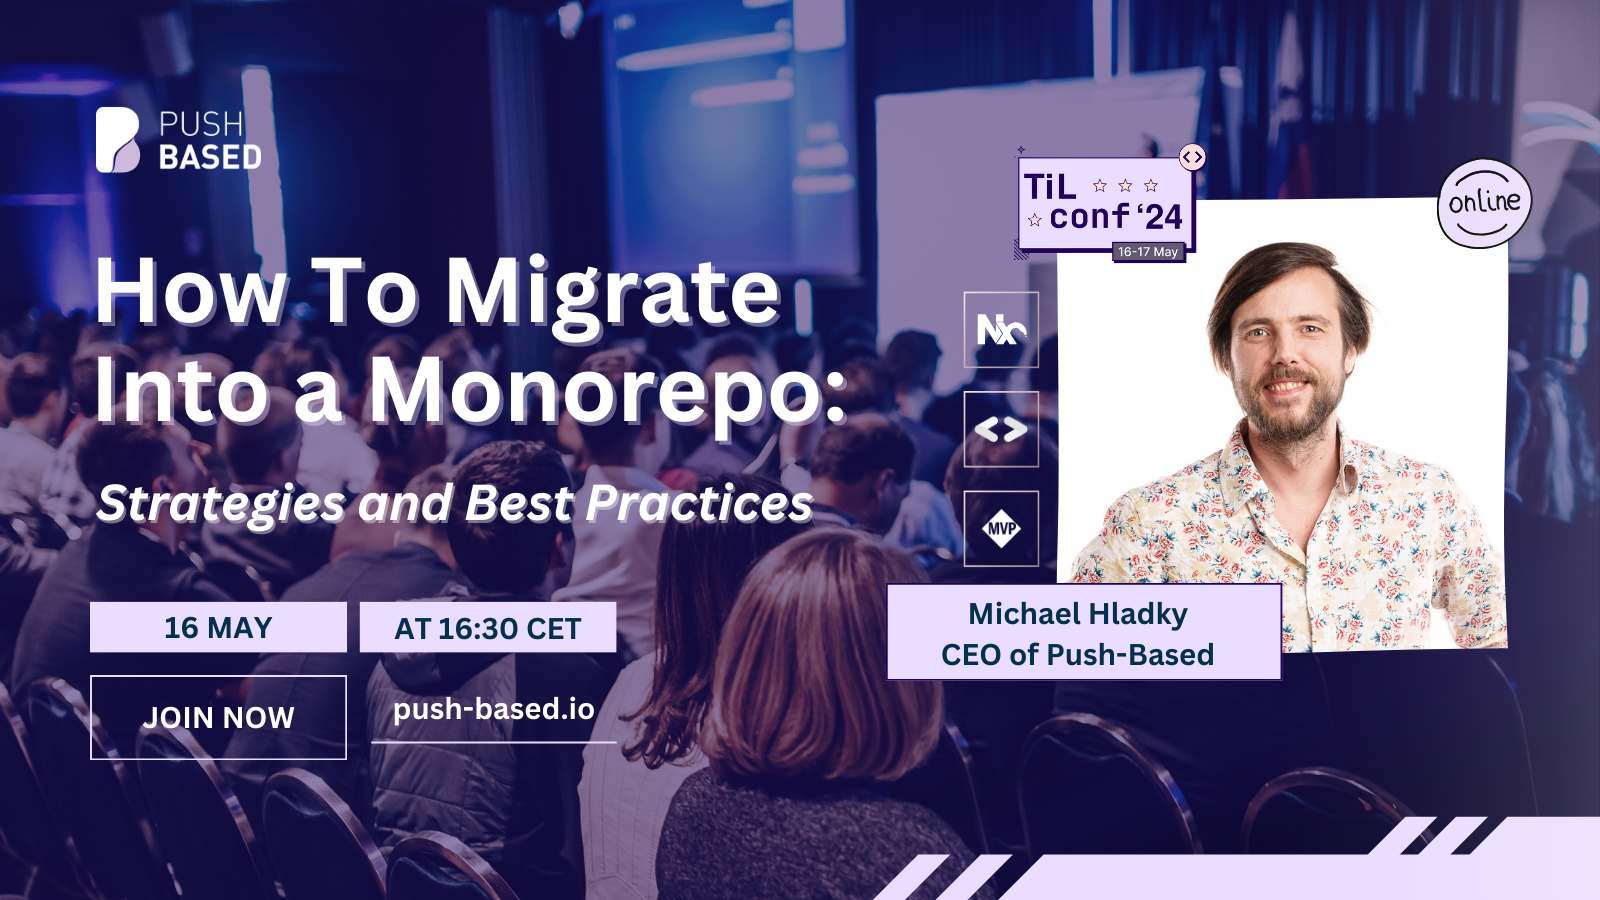 How To Migrate Into a Monorepo: Strategies and Best Practices. Poster.